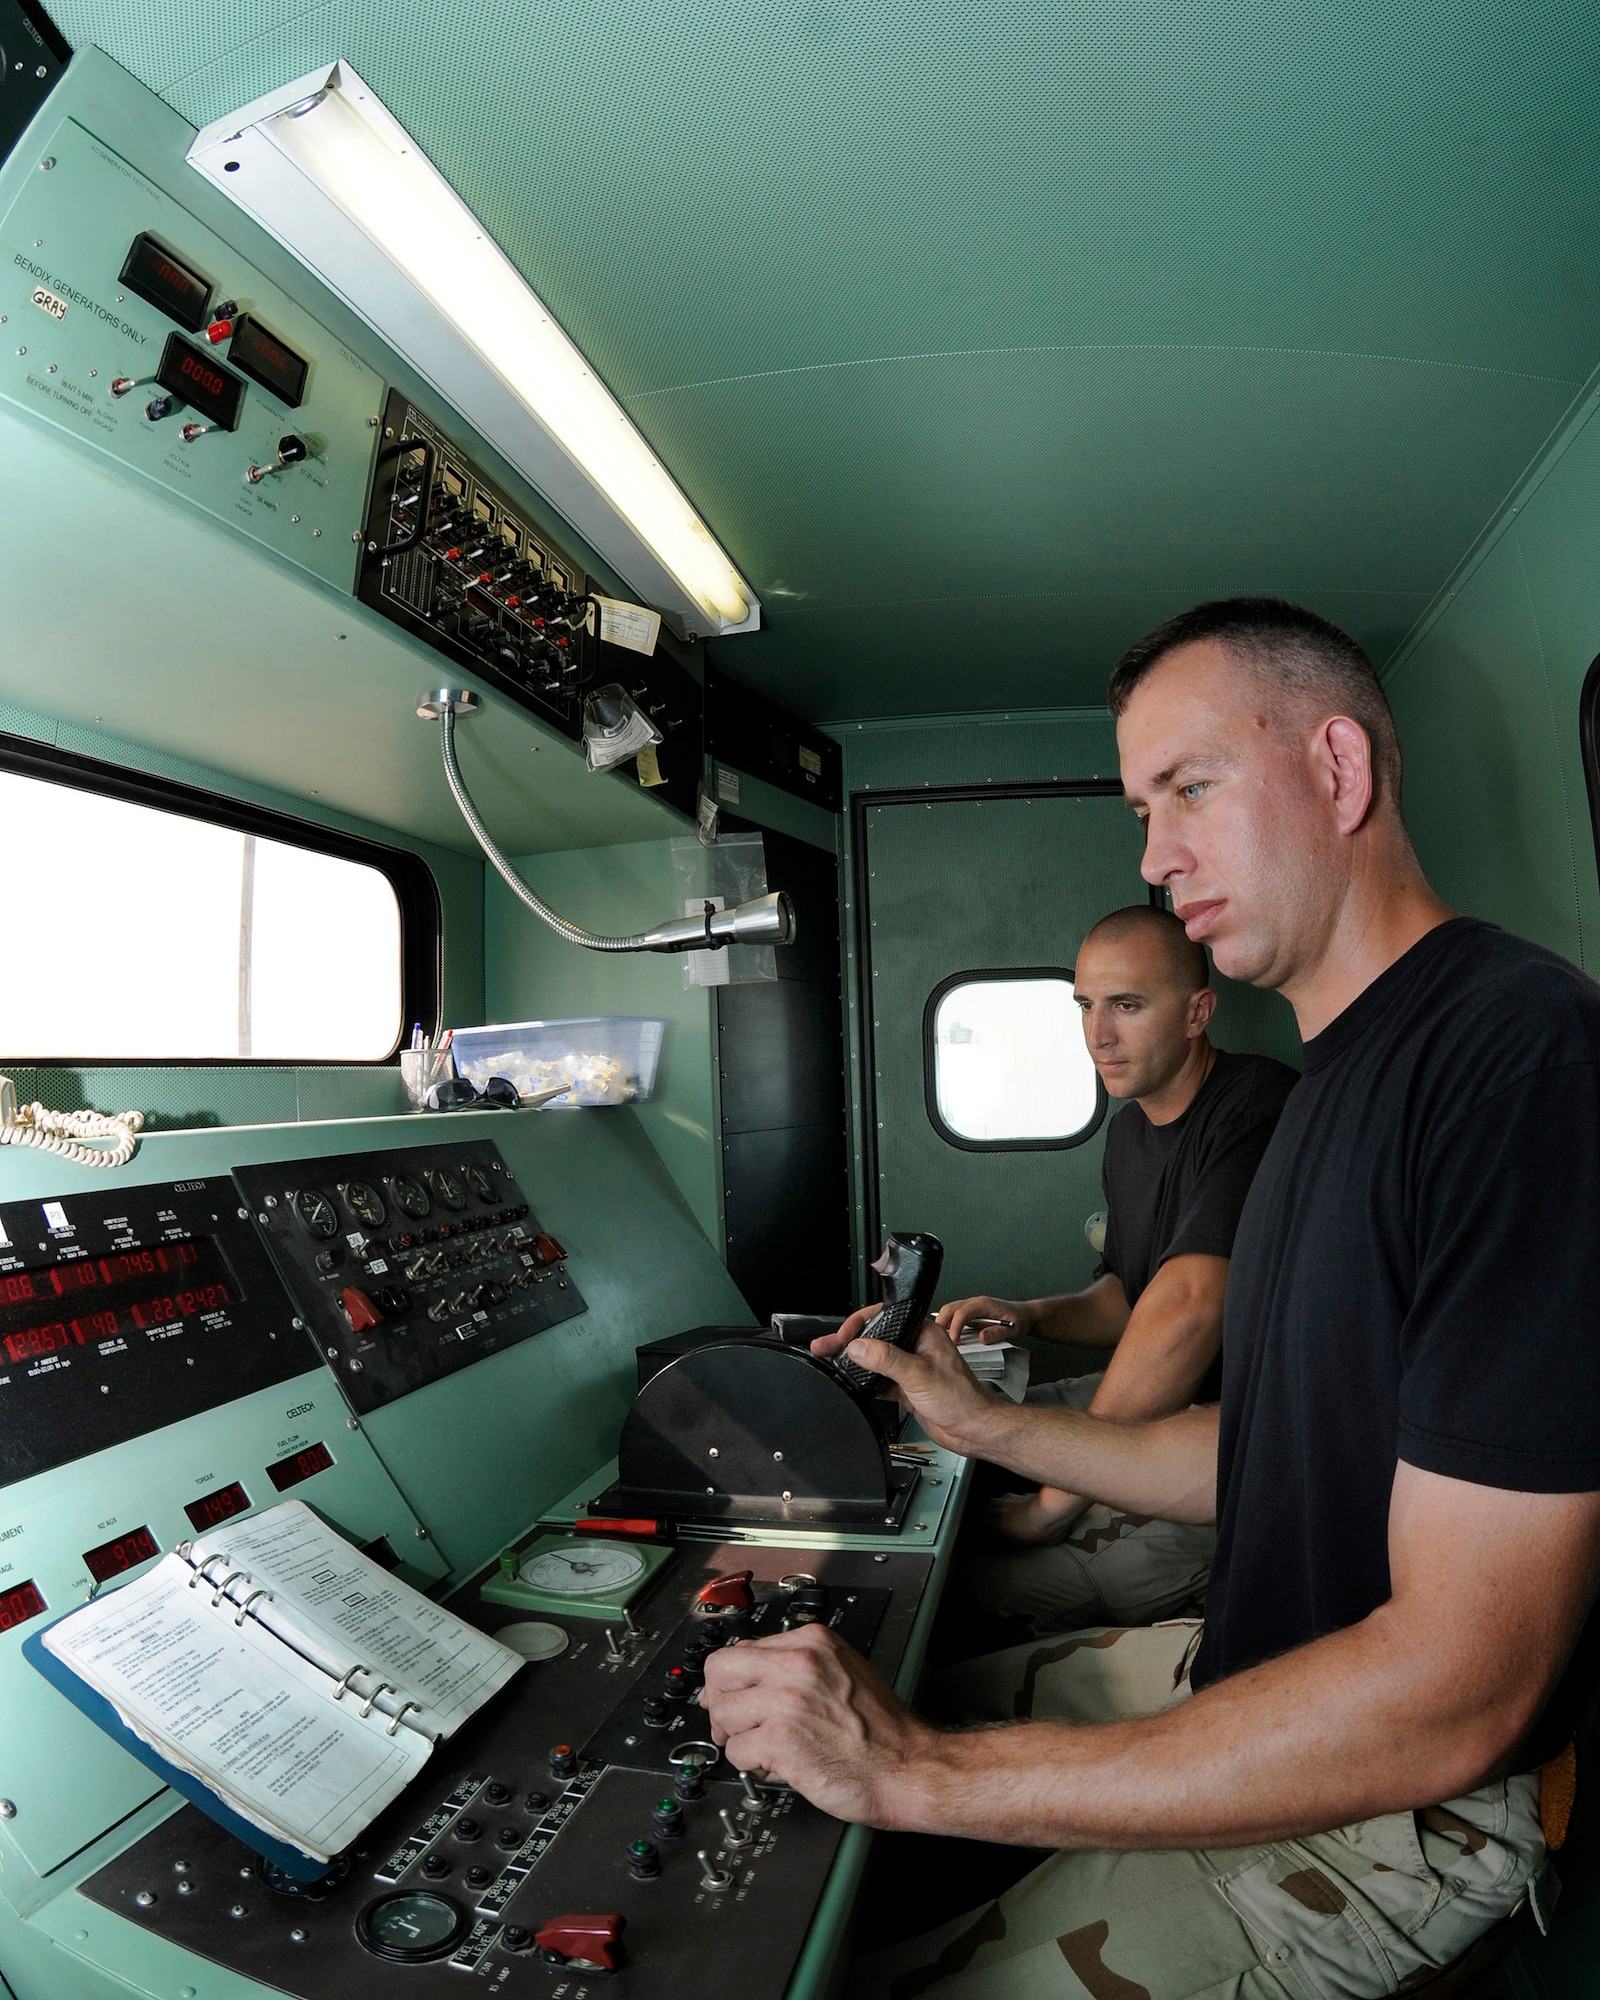 Tech. Sgt. Gregory Mathes, 379th Expeditionary Maintenance Squadron, performs initial engine operations test steps in the control booth as Senior Airman Beau Columbus, 379 EMXS, watches and records each step Sept. 3, 2008, at an undisclosed air base in Southwest Asia.  Sergeant Mathes will give the C-130 Hercules engine a good stressful run through during operations and propeller leak checks. The C-130 Hercules primarily performs the tactical portion of the airlift mission. The aircraft is capable of operating from rough, dirt strips and is the prime transport for air dropping troops and equipment into hostile areas.  Sergeant Mathes, a native of Greenville, Tenn., is deployed from Ramstein Air Force Base, Germany and Airman Columbus, originally from Buffalo, N.Y., is deployed from Yokota Air Base, Japan.  Both are supporting Operations Iraqi and Enduring Freedom and Joint Task Force-Horn of Africa. (U. S. Air Force photo by Tech. Sgt. Michael Boquette/Released)